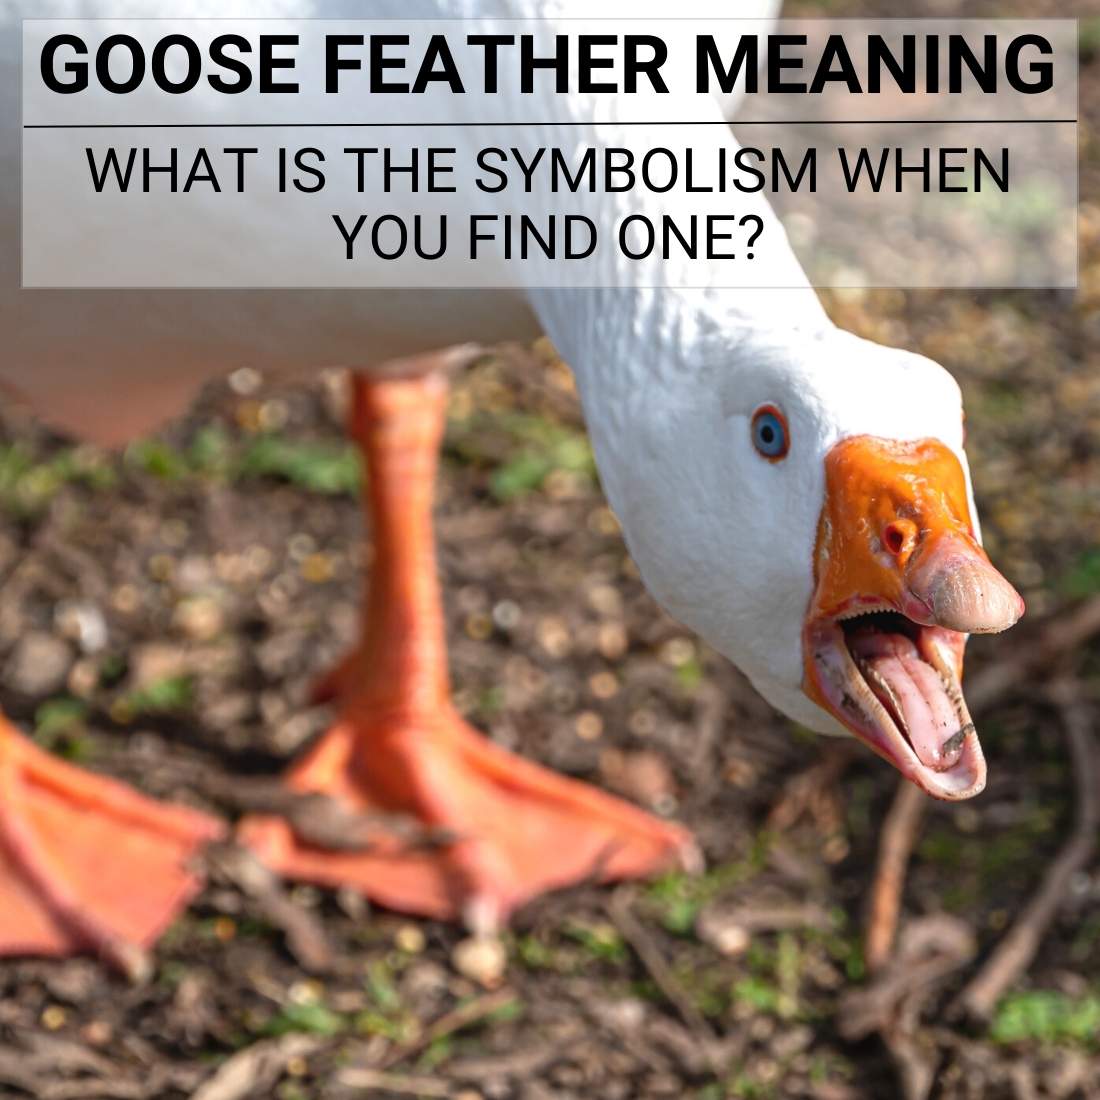 Goose feather meaning